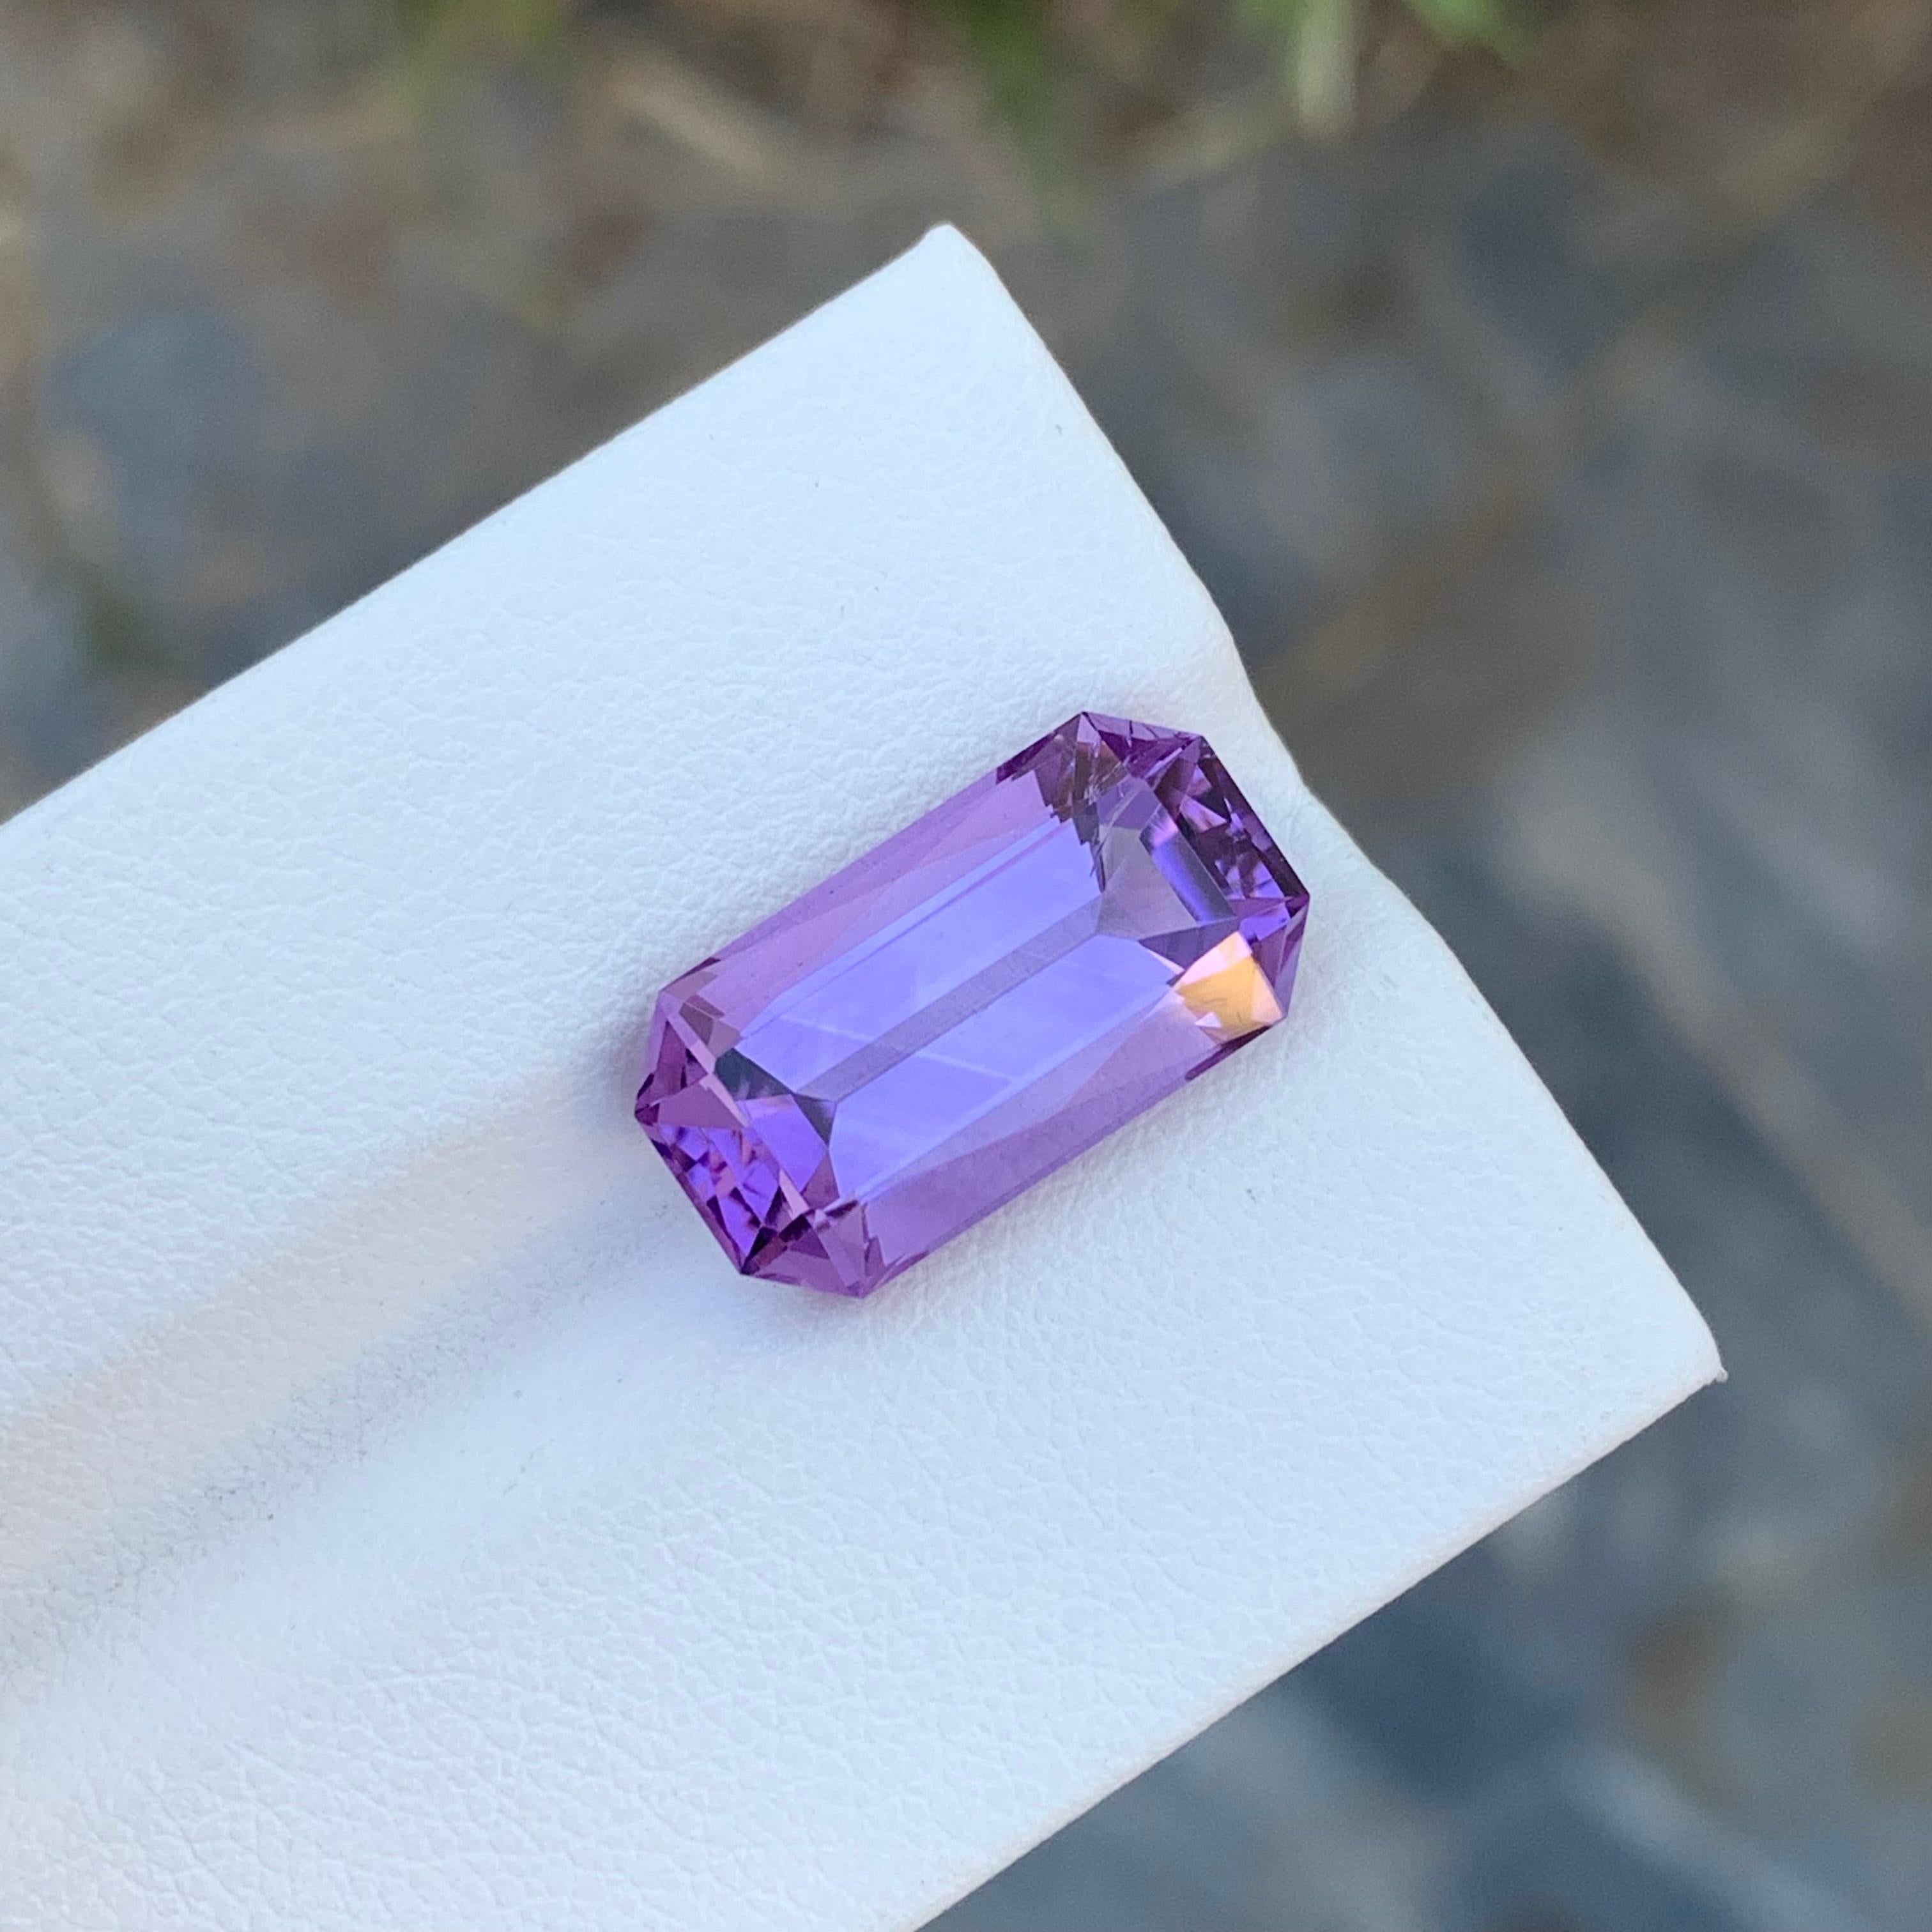 Loose Amethyst 
Weight: 7.50 Carats 
Dimension: 16.5x8.8x7.1 Mm
Origin: Brazil
Shape: Emerald 
Color: Purple
Treatment: Non
Certificate: On Demand
A loose amethyst, with its mesmerizing purple hue, captivates admirers with its beauty. This gemstone,